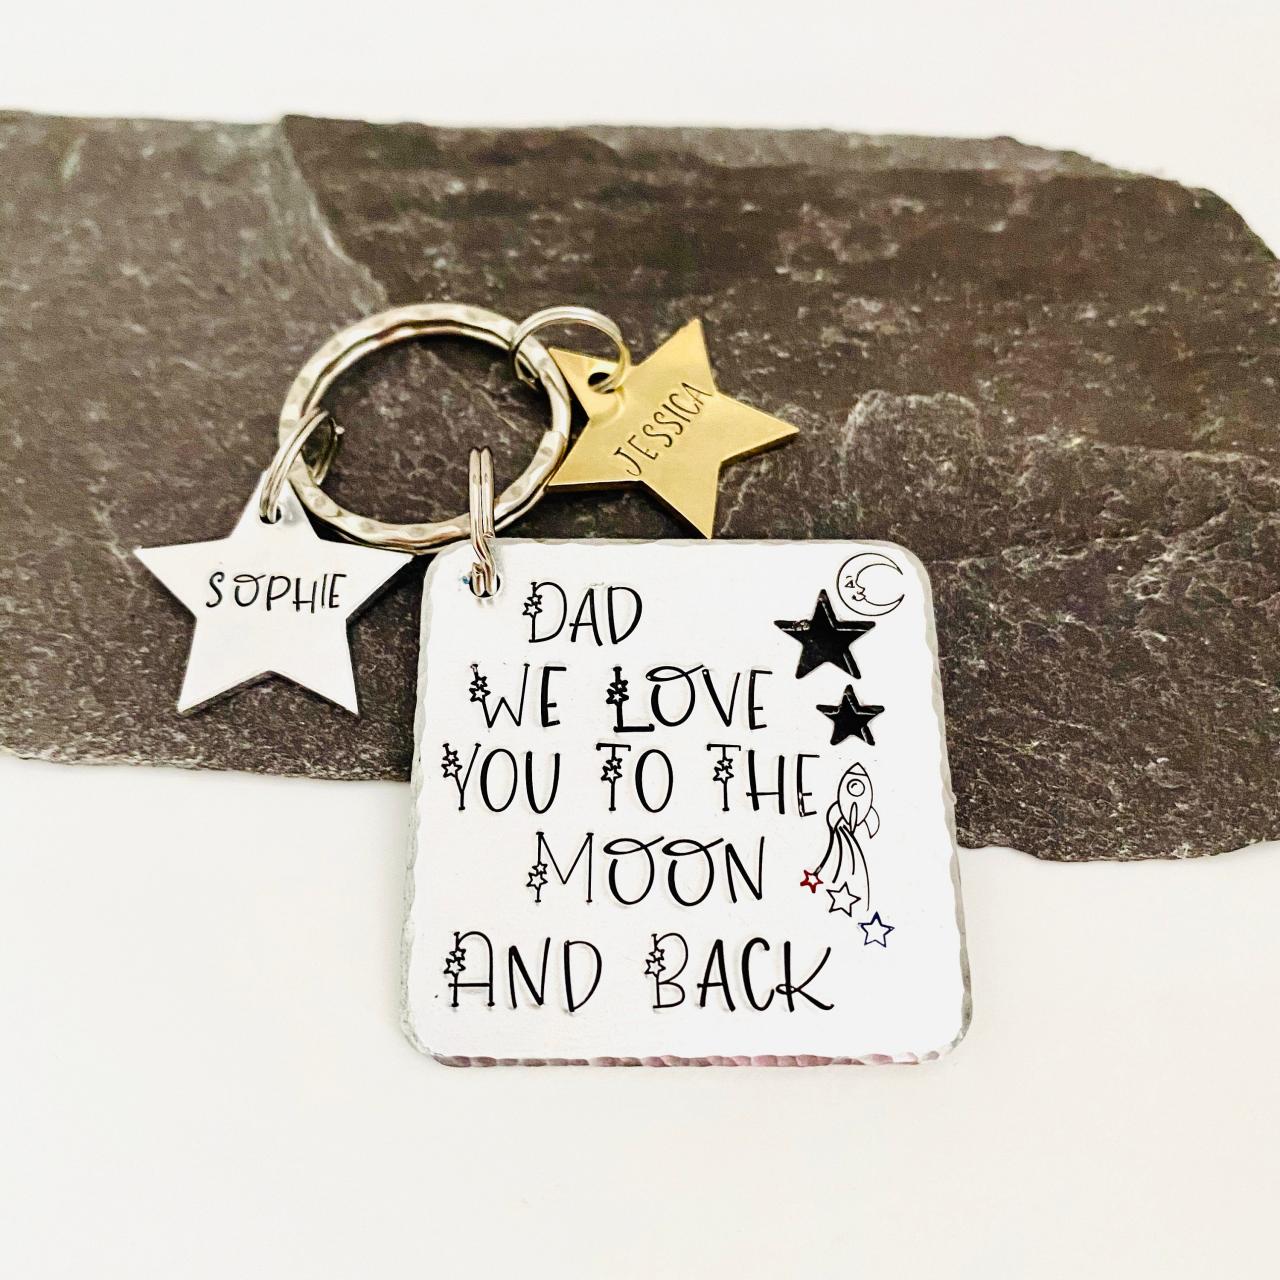 We Love You To The Moon And Back, Keychain Keyring For Dad, Hand Stamped Daddy Gift, Fathers Day Keyring, Gift Off The Kids, Uncle Gift..